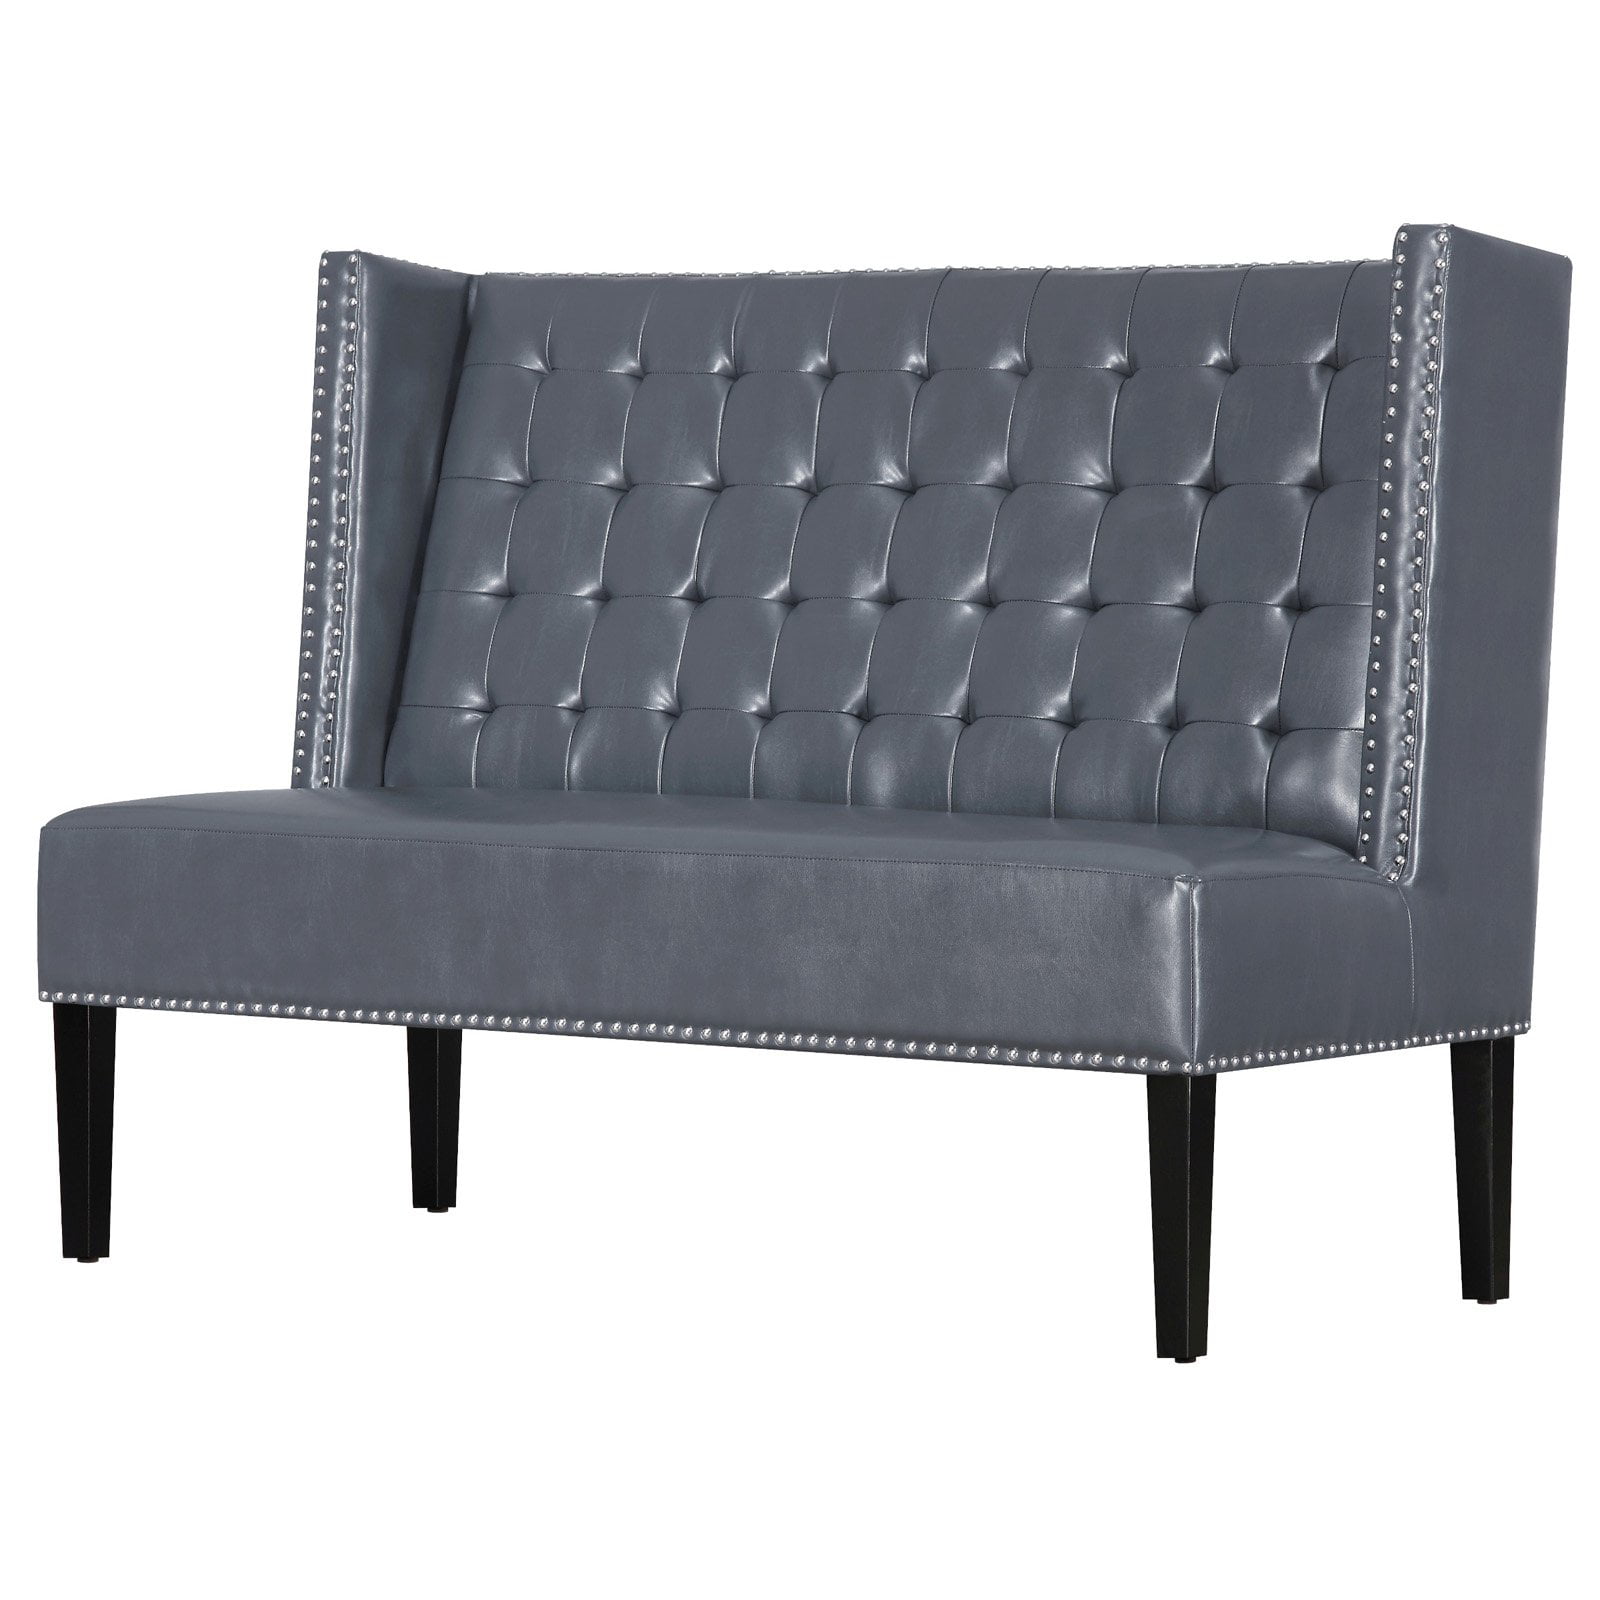 Tov Furniture Halifax Leather Banquette, Faux Leather Banquette Bench